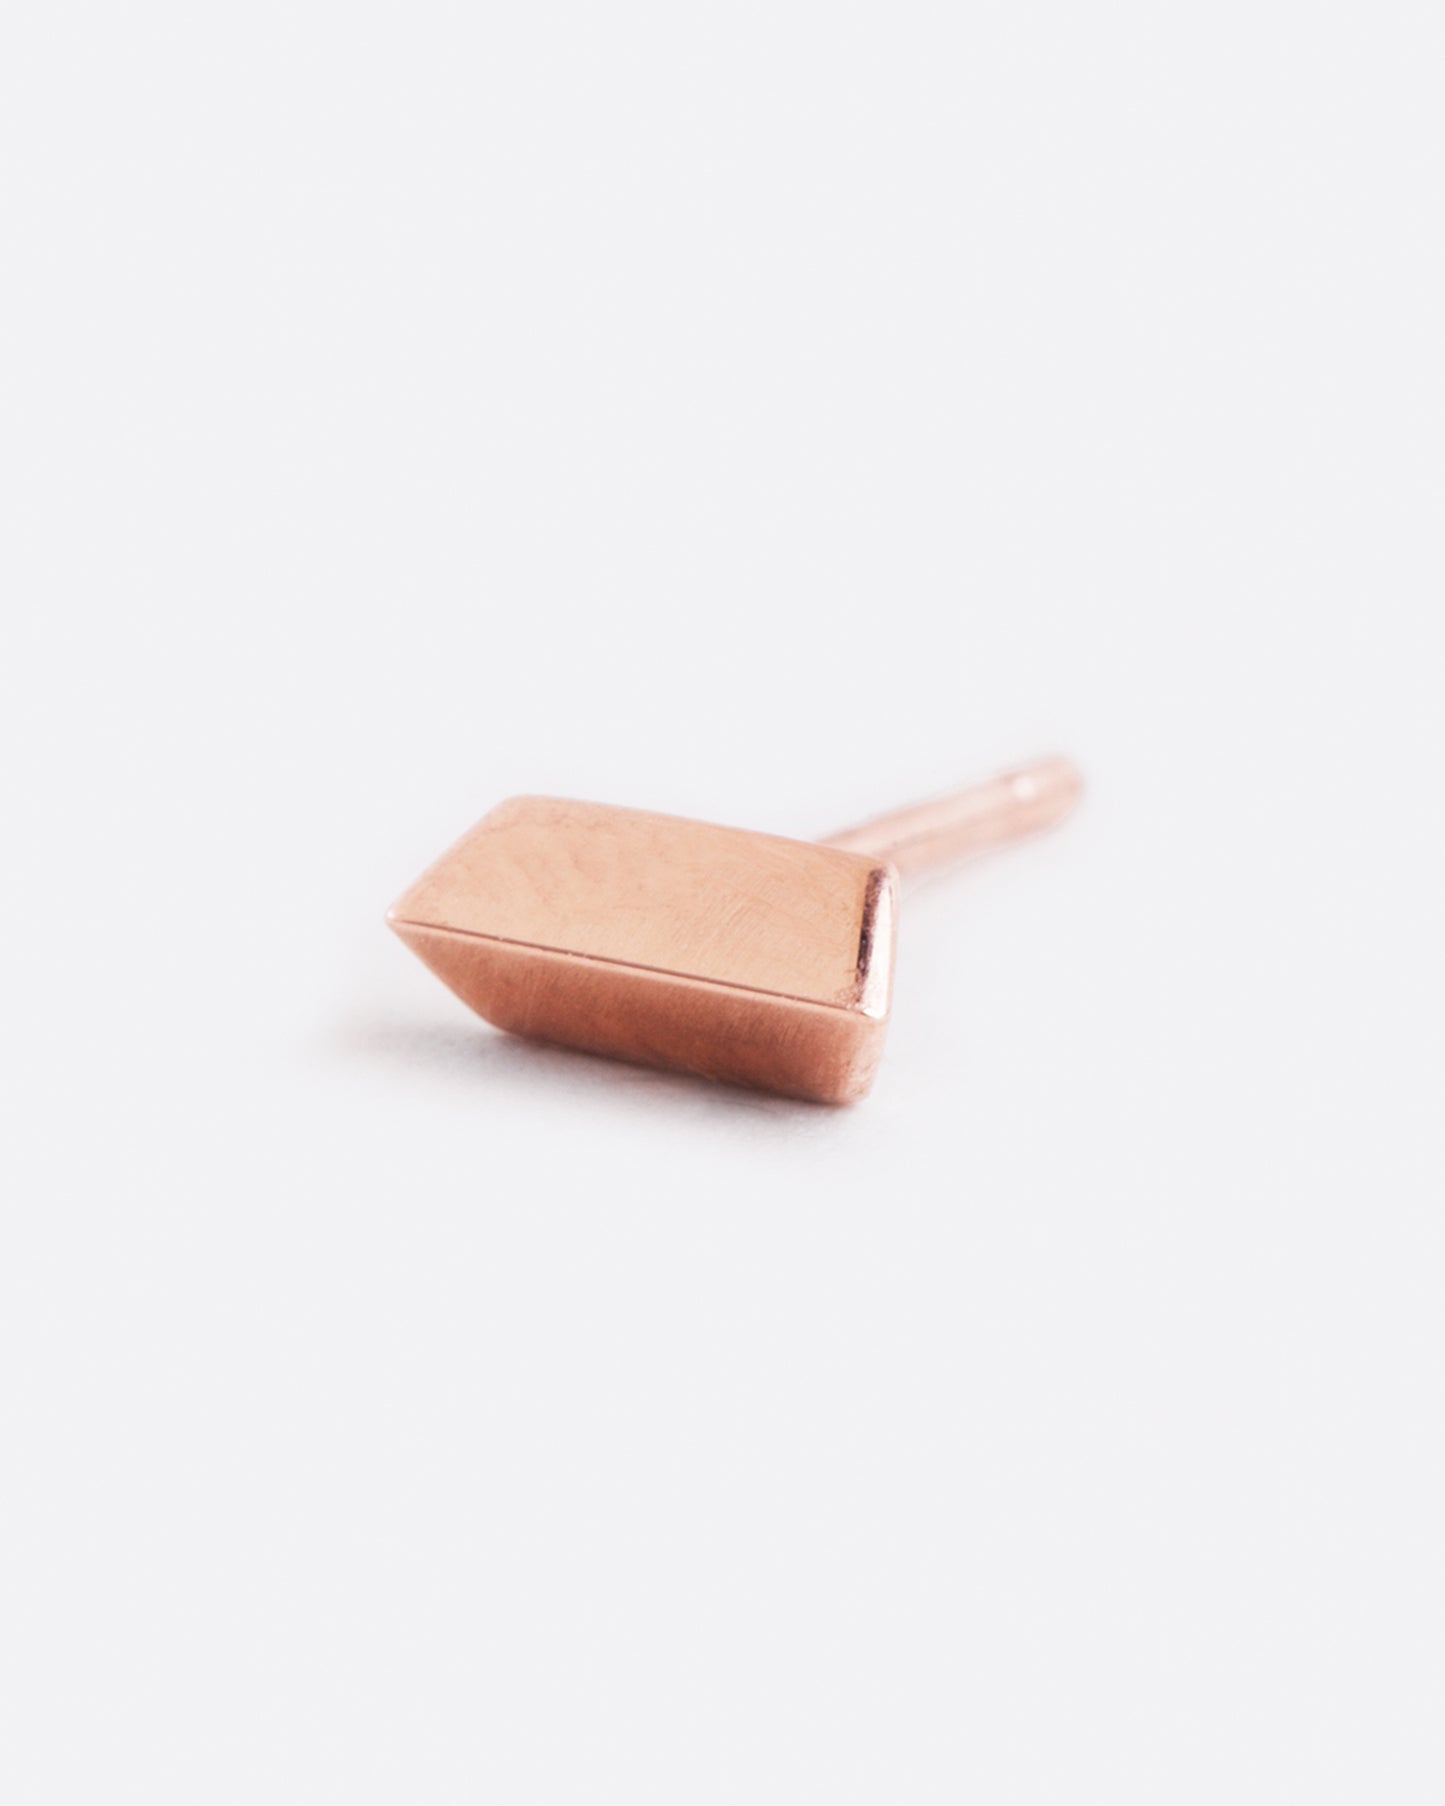 14k rose gold angled bar stud earring by Selin Kent, shown from the front.